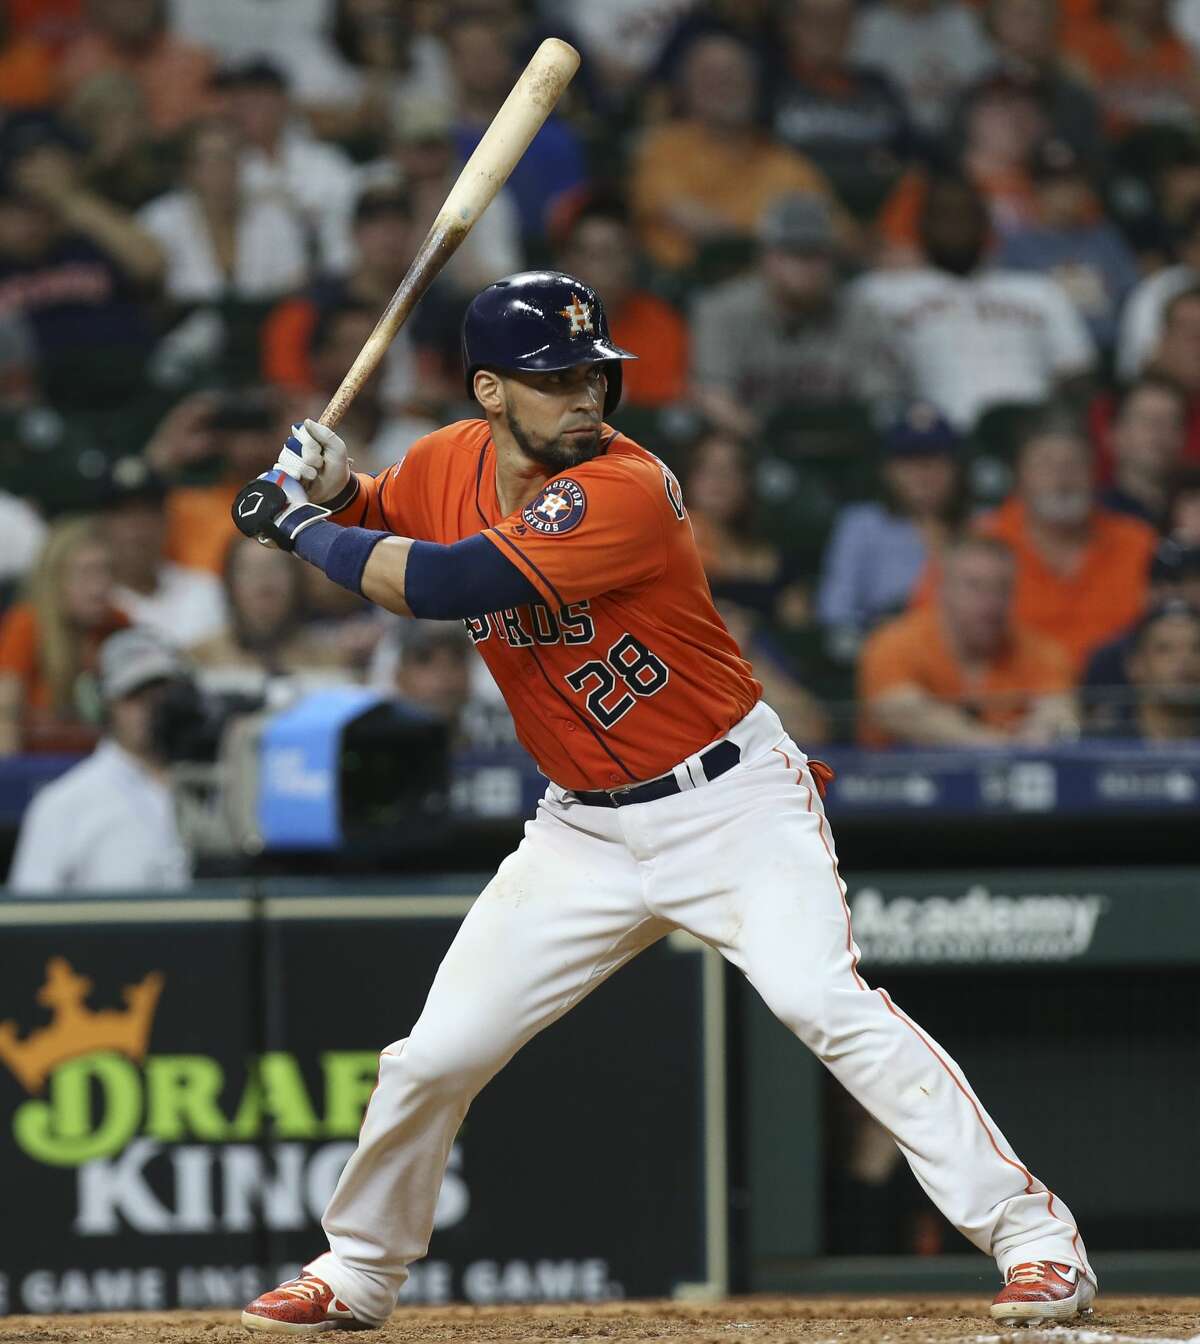 Yuli Gurriel of the Houston Astros hits a walkoff home run in the